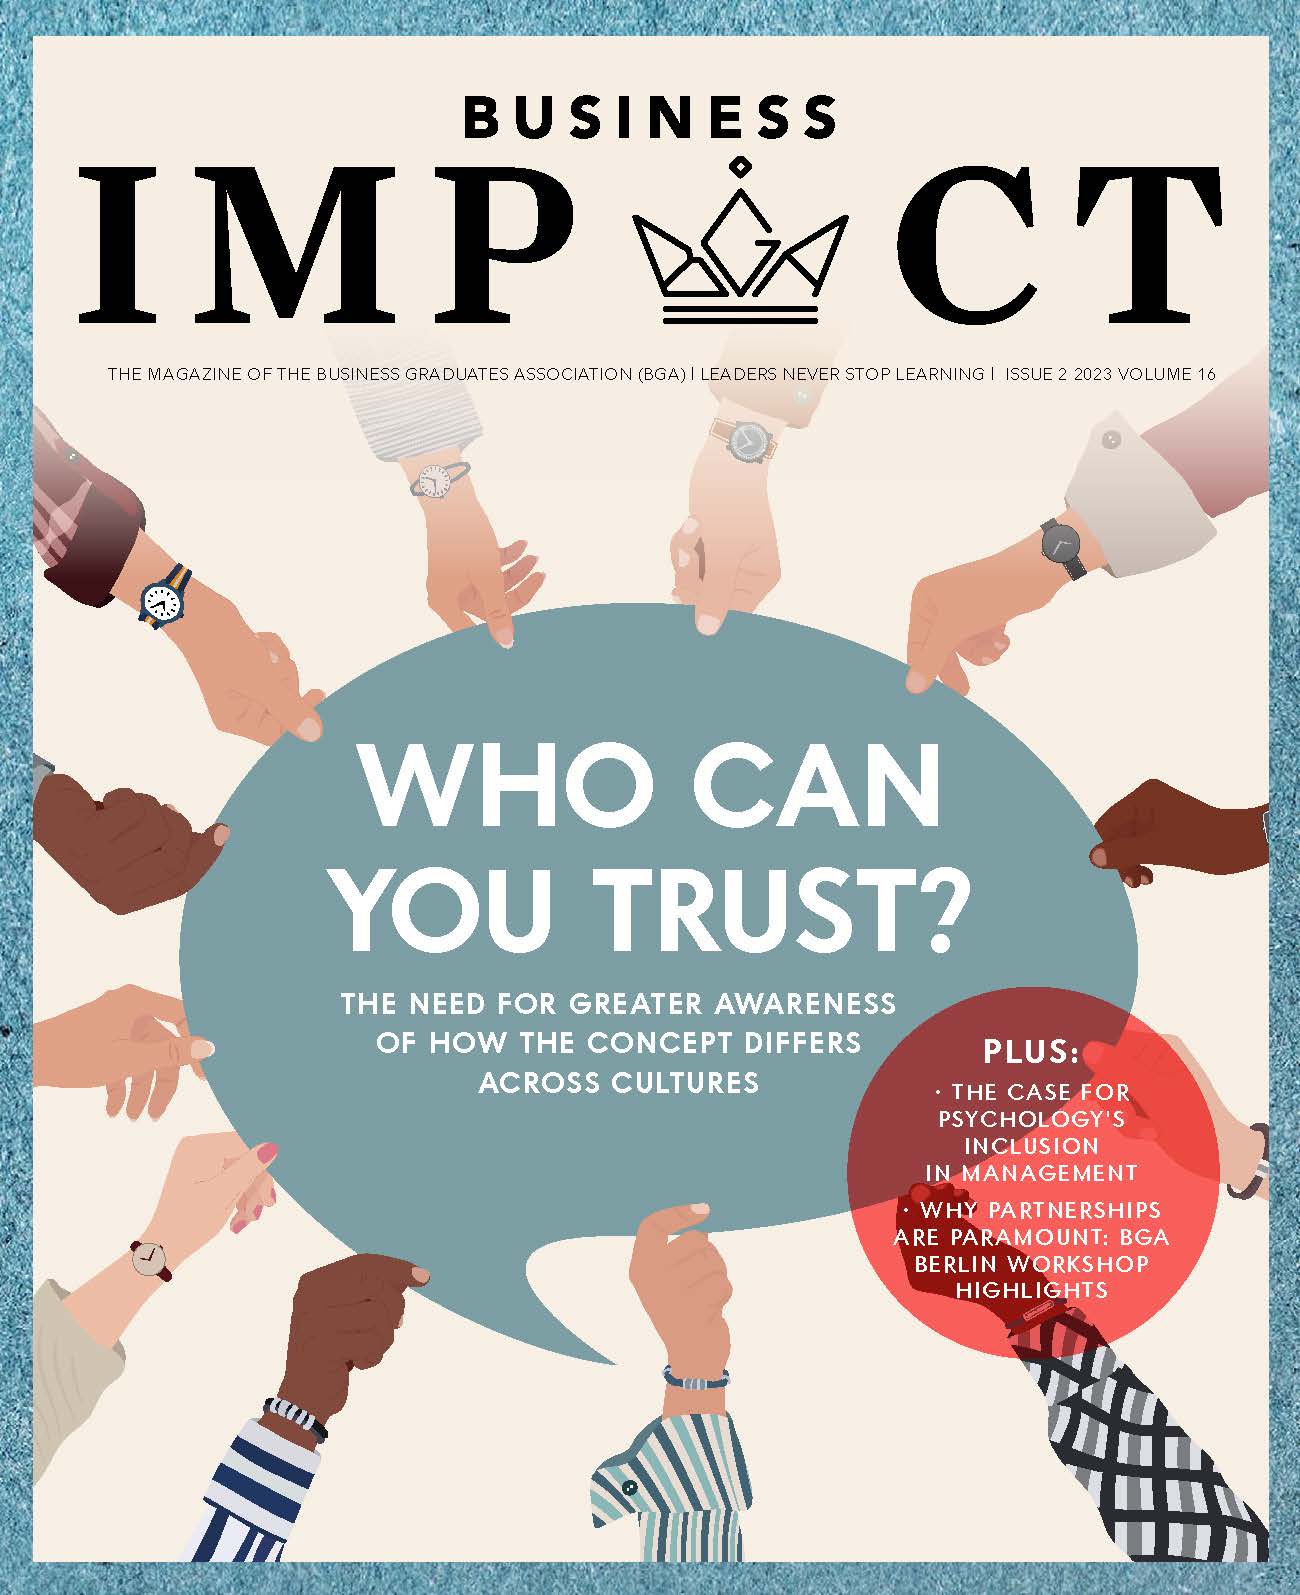 Business Impact Issue 2 2023 Volume 16